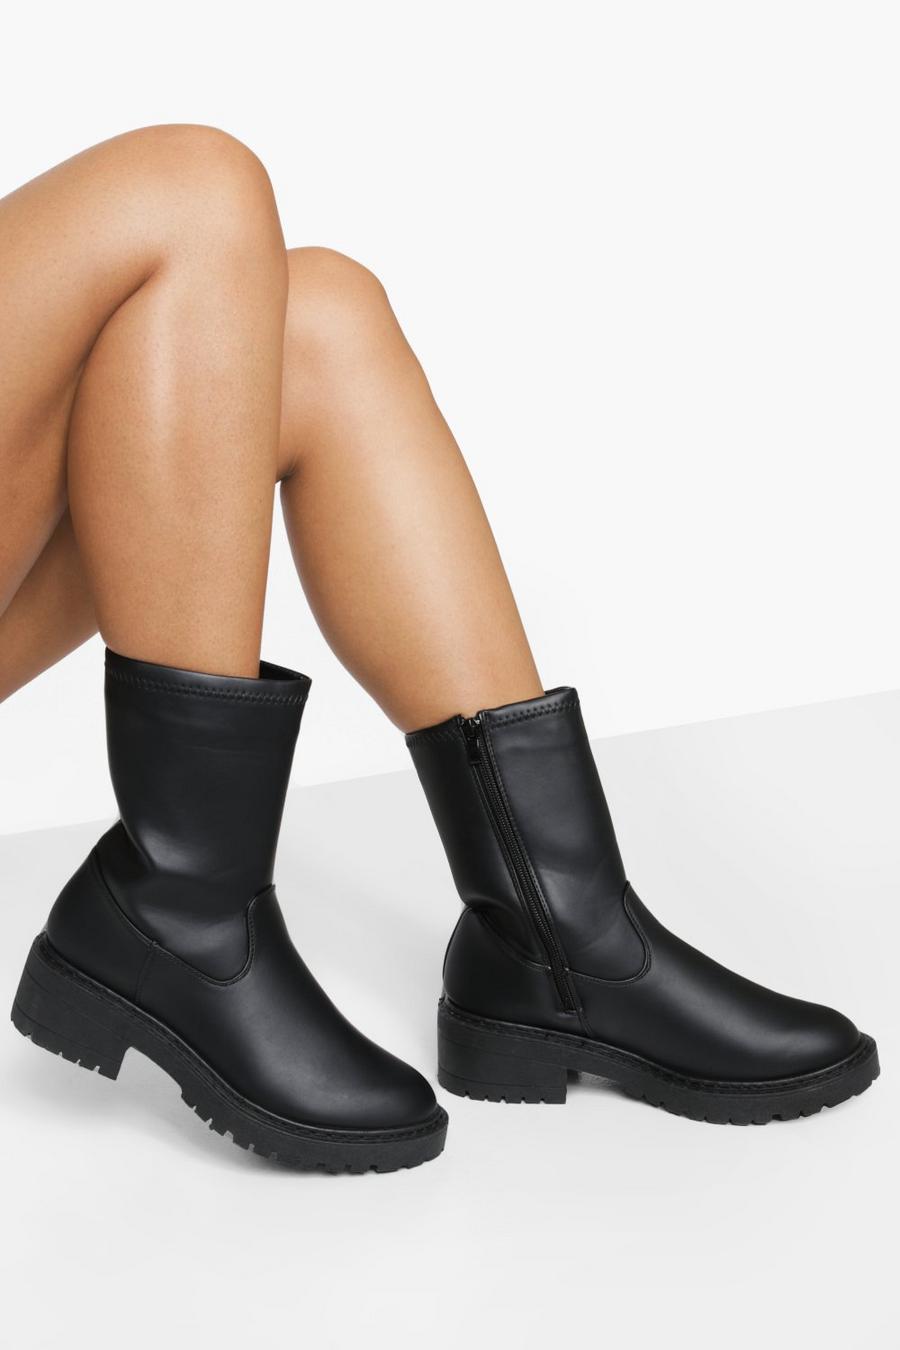 Black noir Wide Fit Chunky Calf High Boots